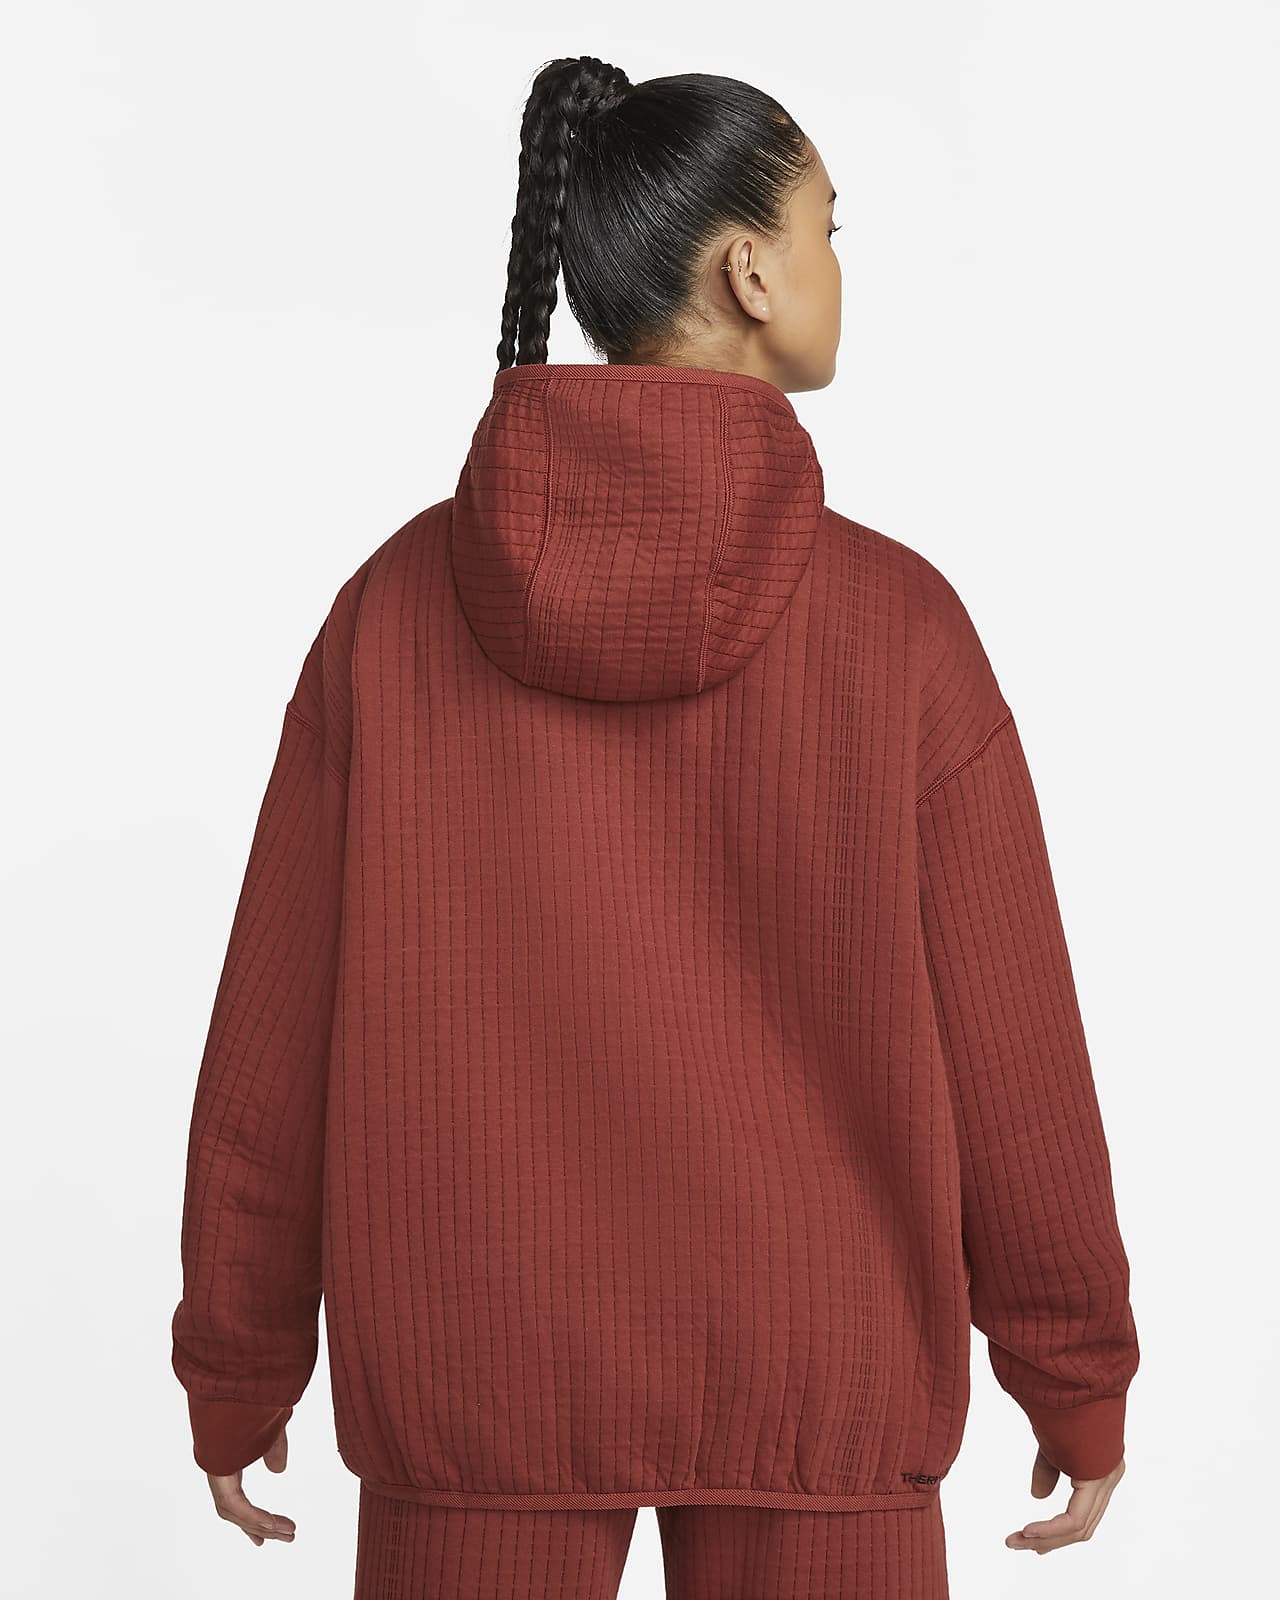 Pack Therma-FIT ADV Nike Sportswear Pullover. Engineered Tech